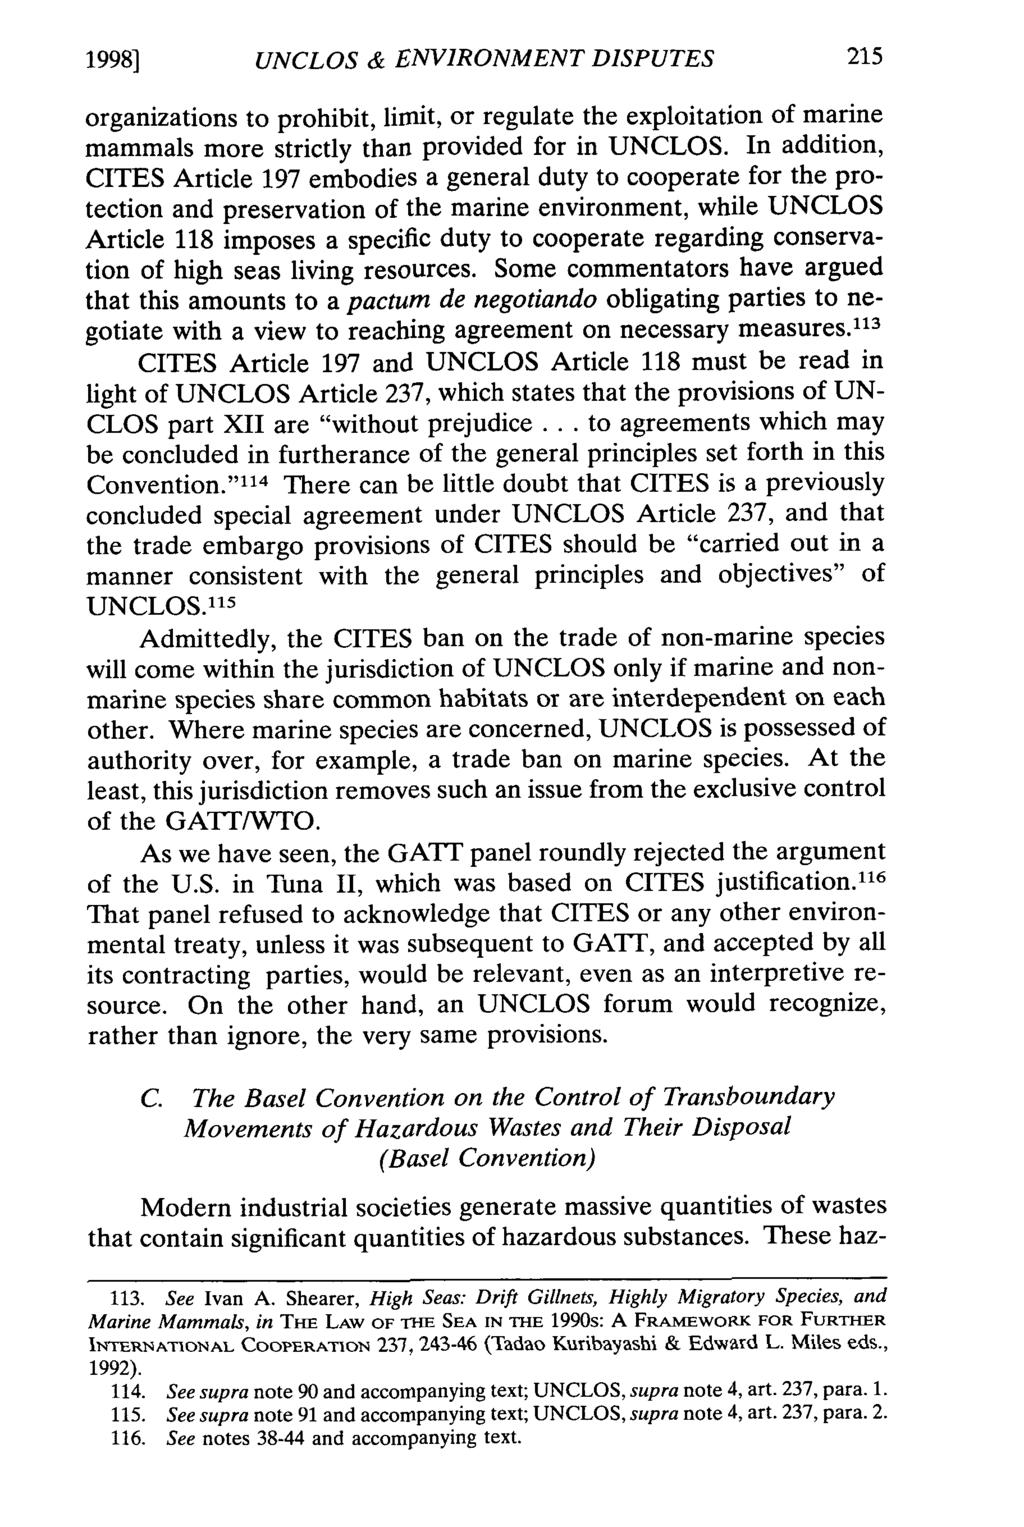 1998] UNCLOS & ENVIRONMENT DISPUTES organizations to prohibit, limit, or regulate the exploitation of marine mammals more strictly than provided for in UNCLOS.